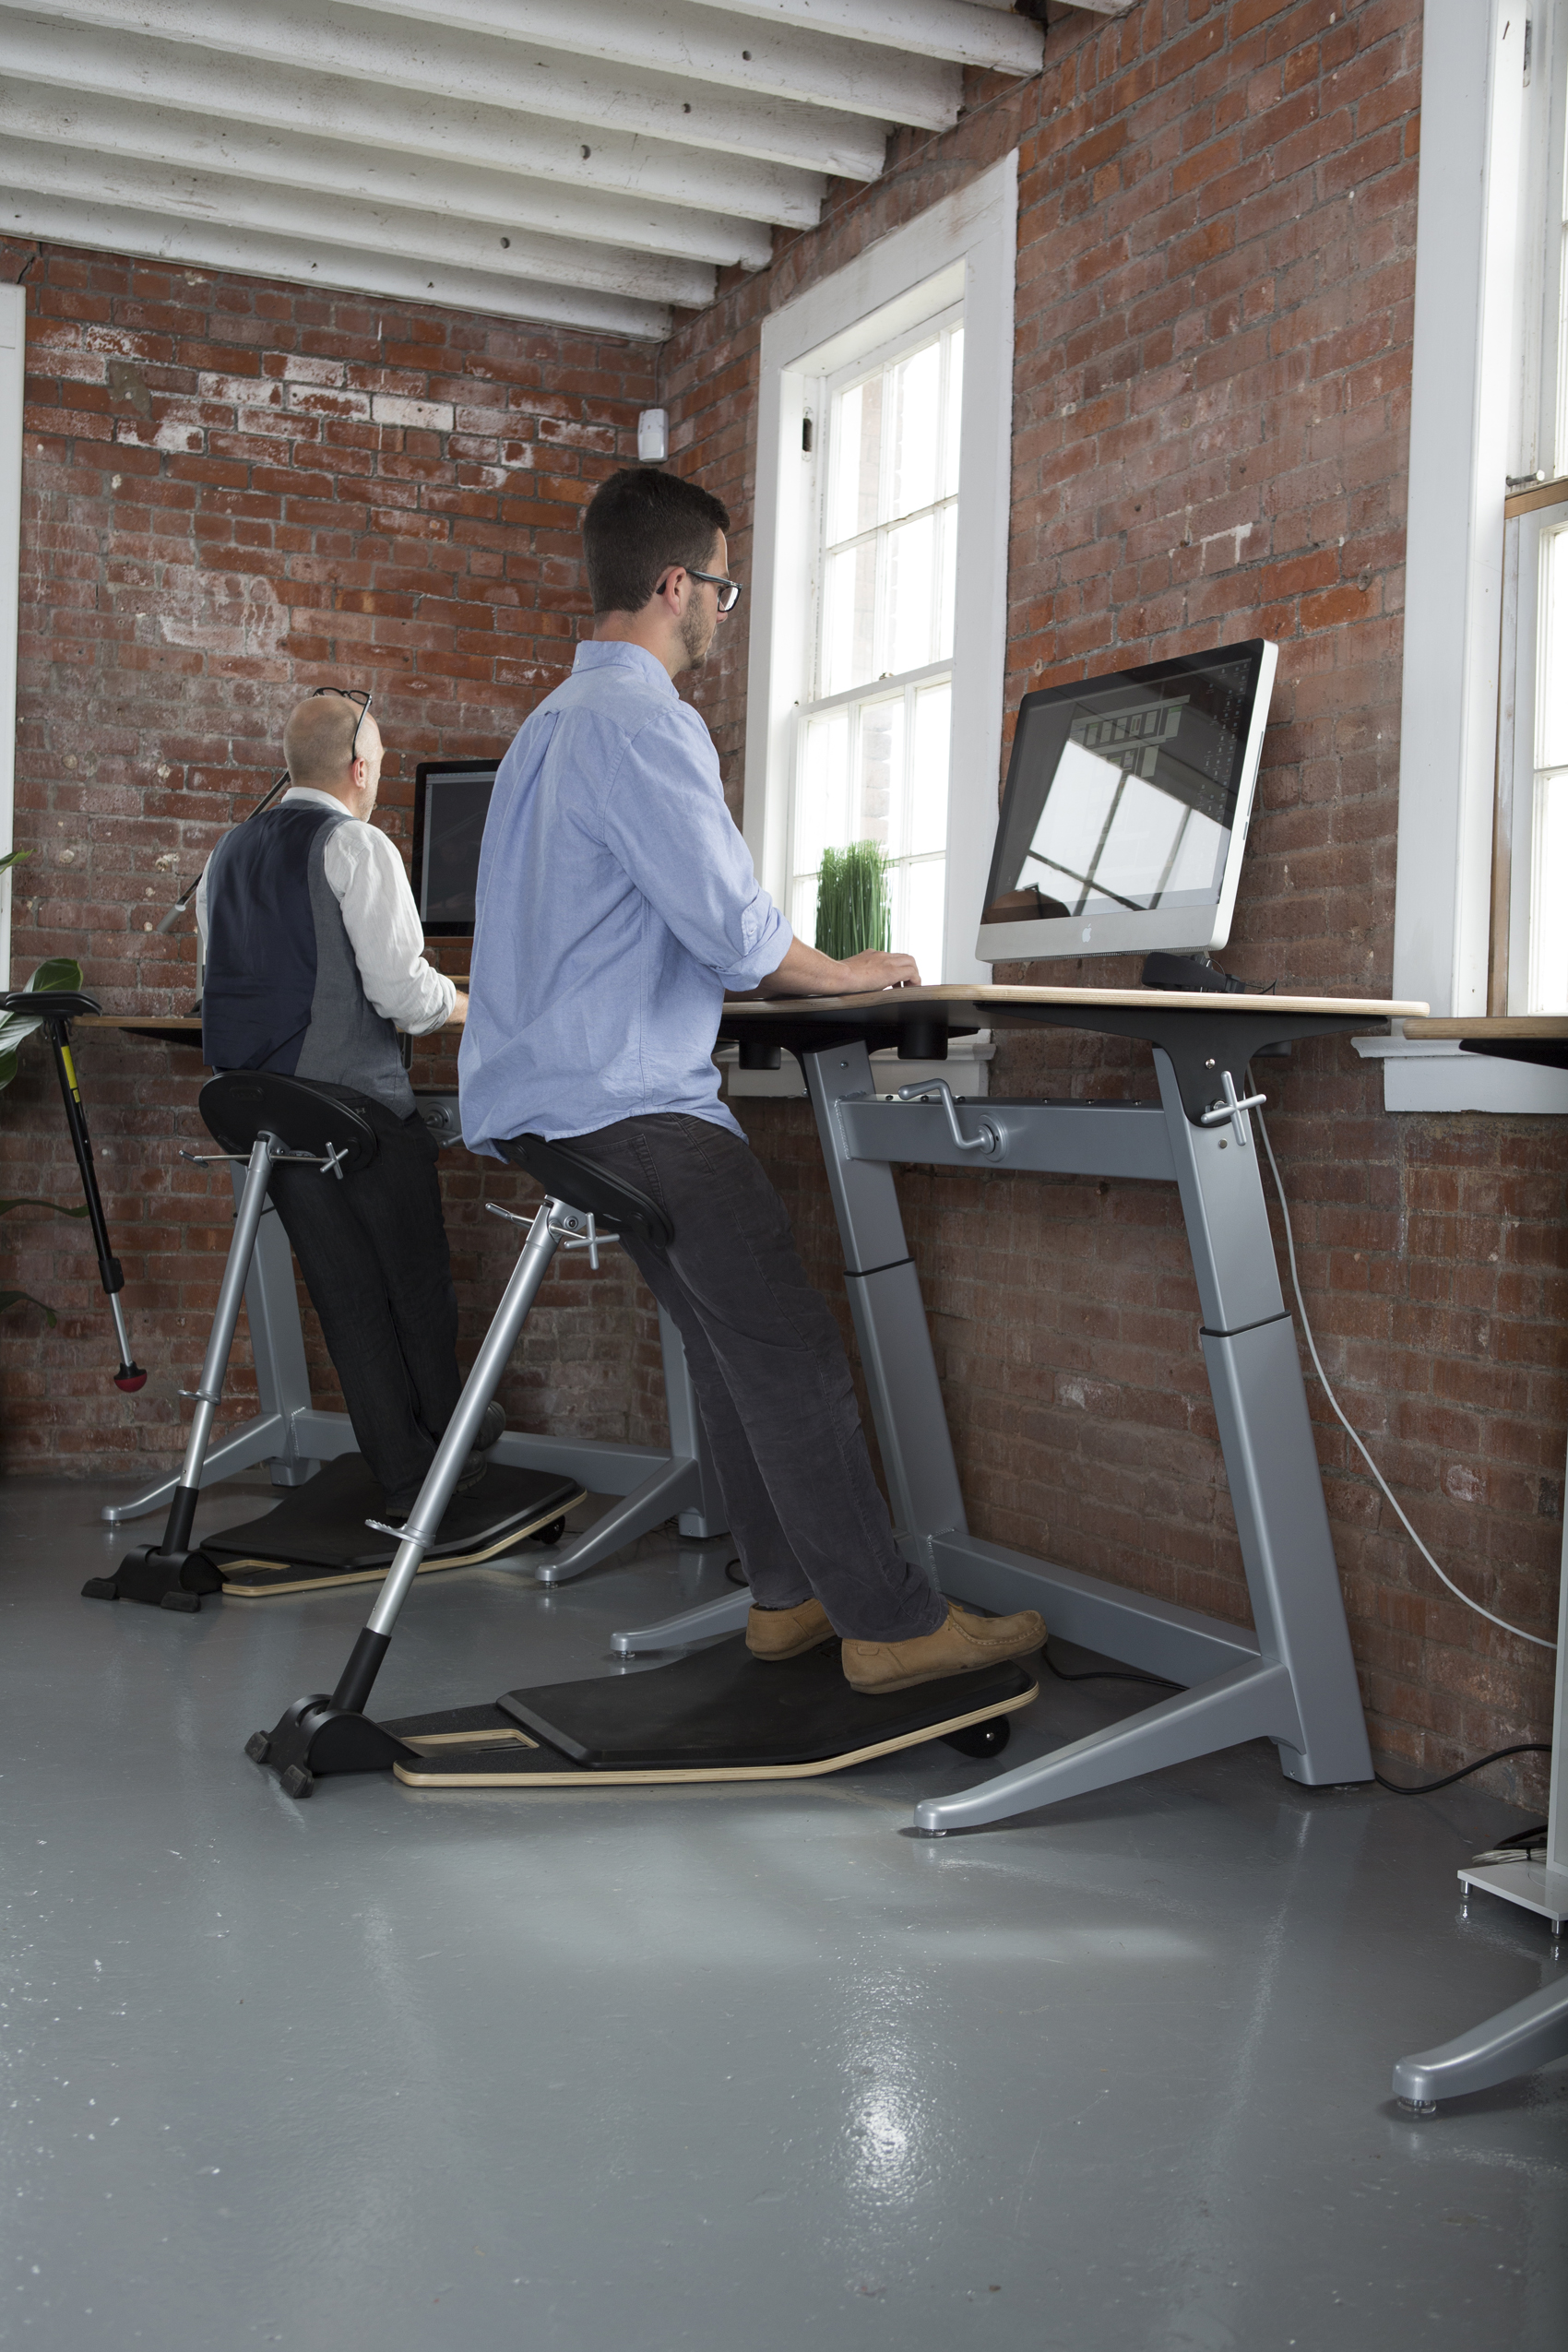 Focal's Locus Workstation provides a healthier upright way to work.